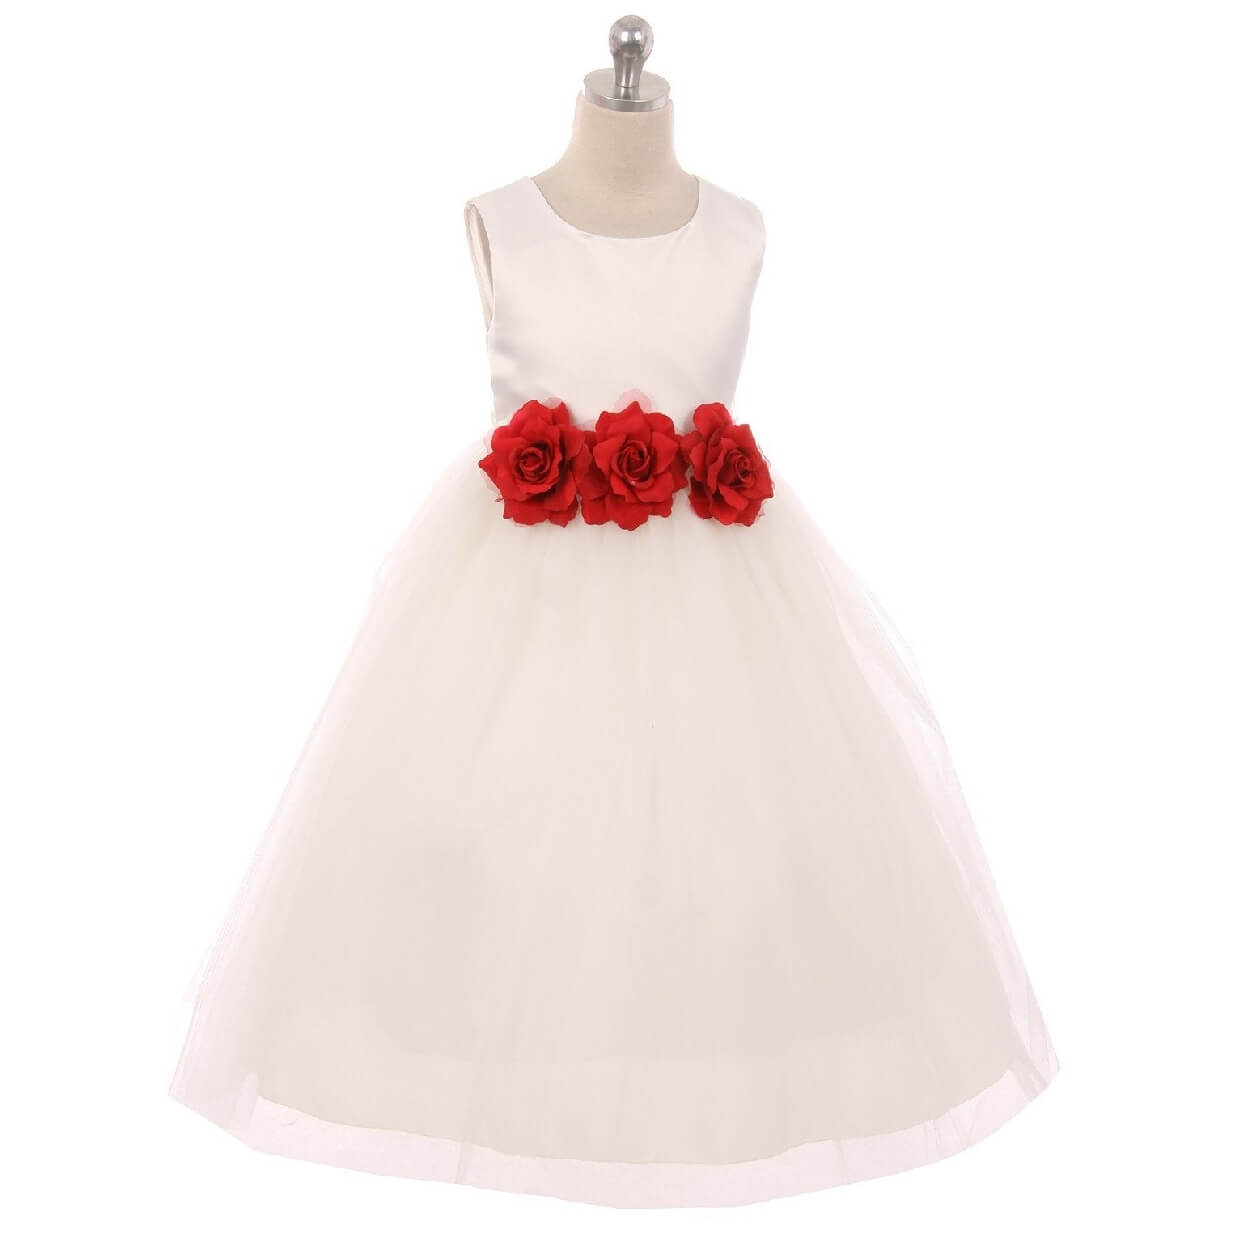 Flower Girl Dress with red flowers